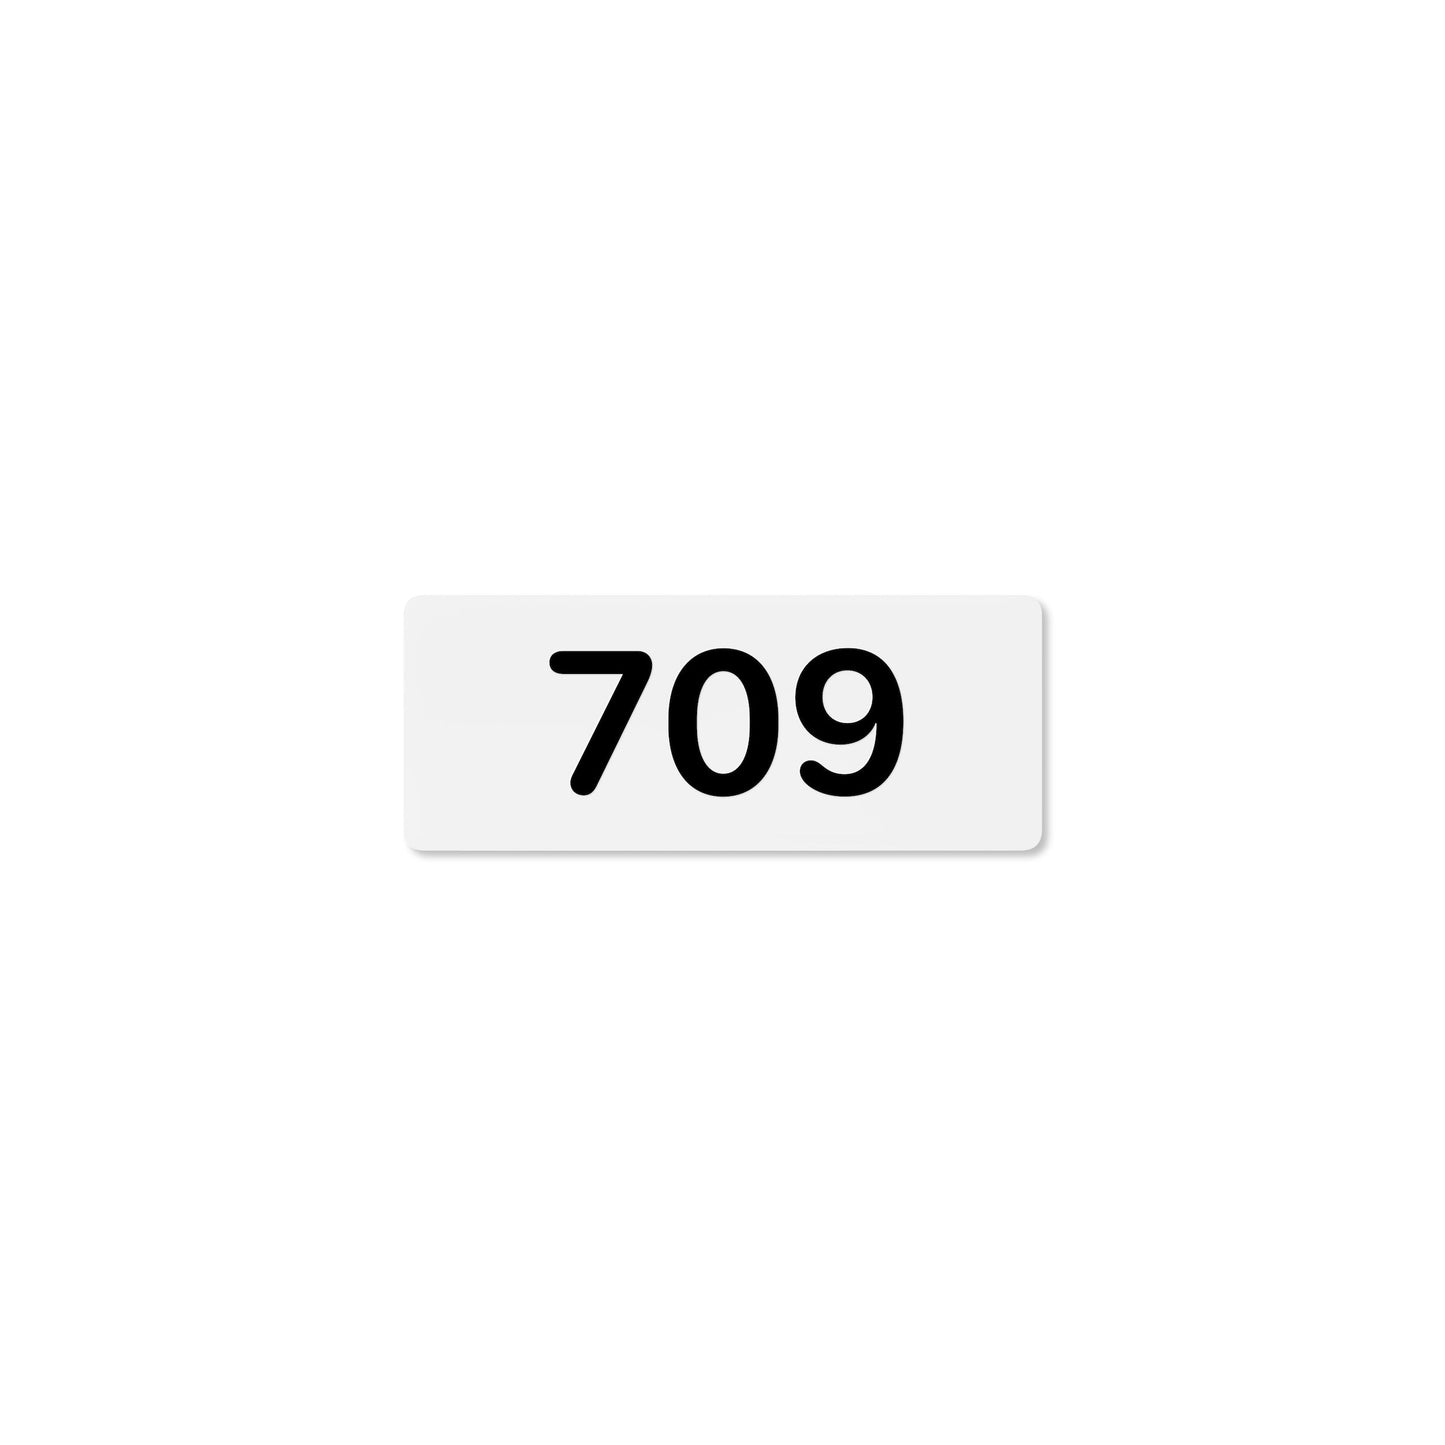 Numeral 709